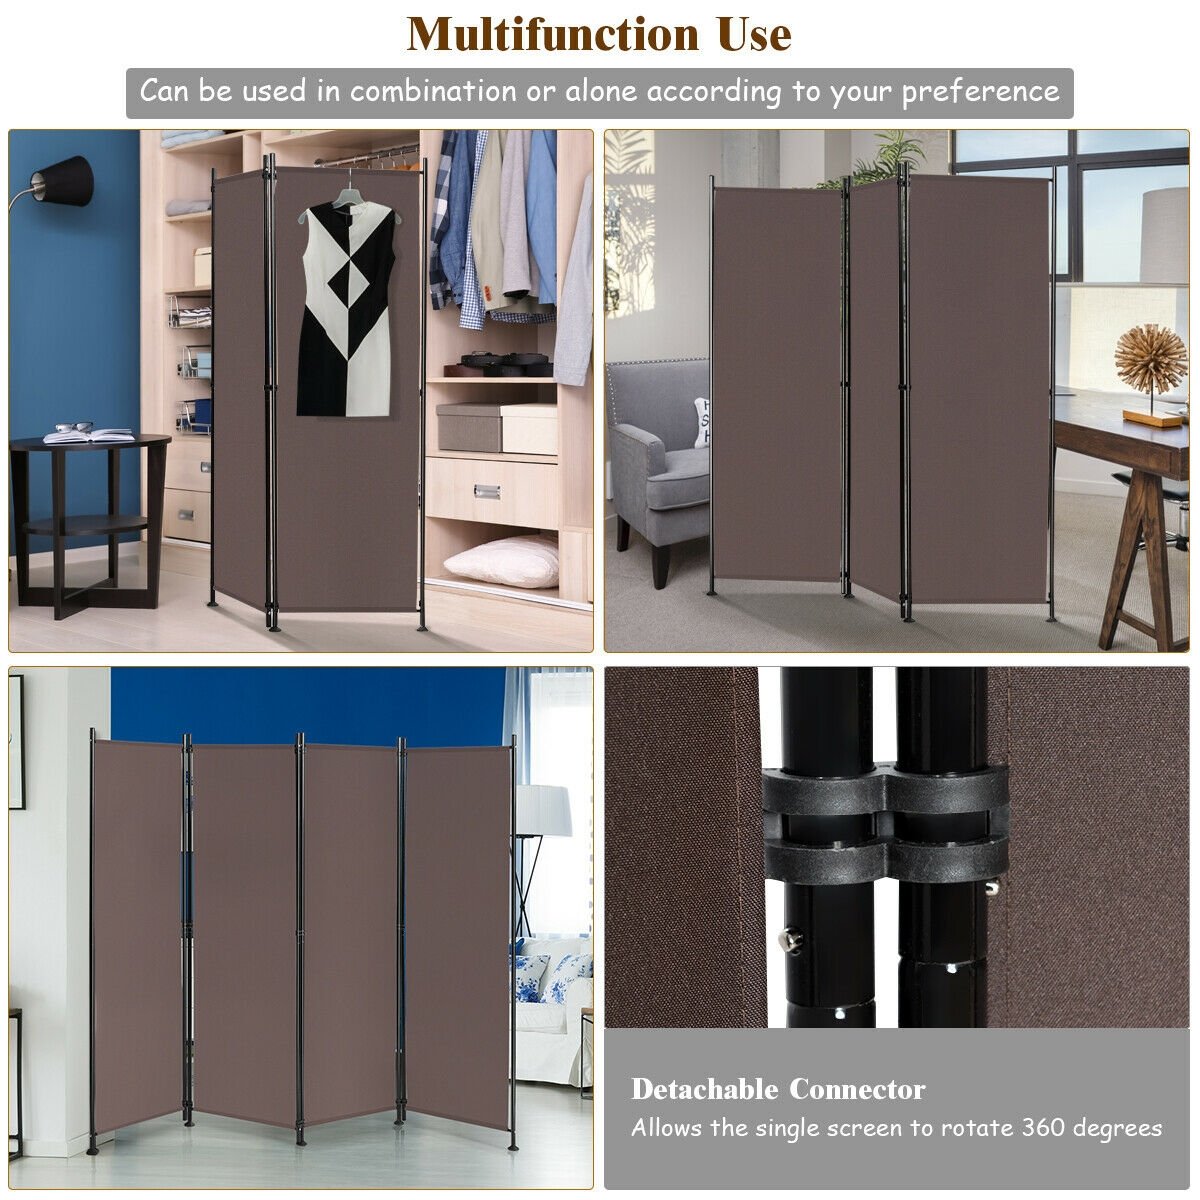 4-Panel Room Divider Folding Privacy Screen, Brown at Gallery Canada